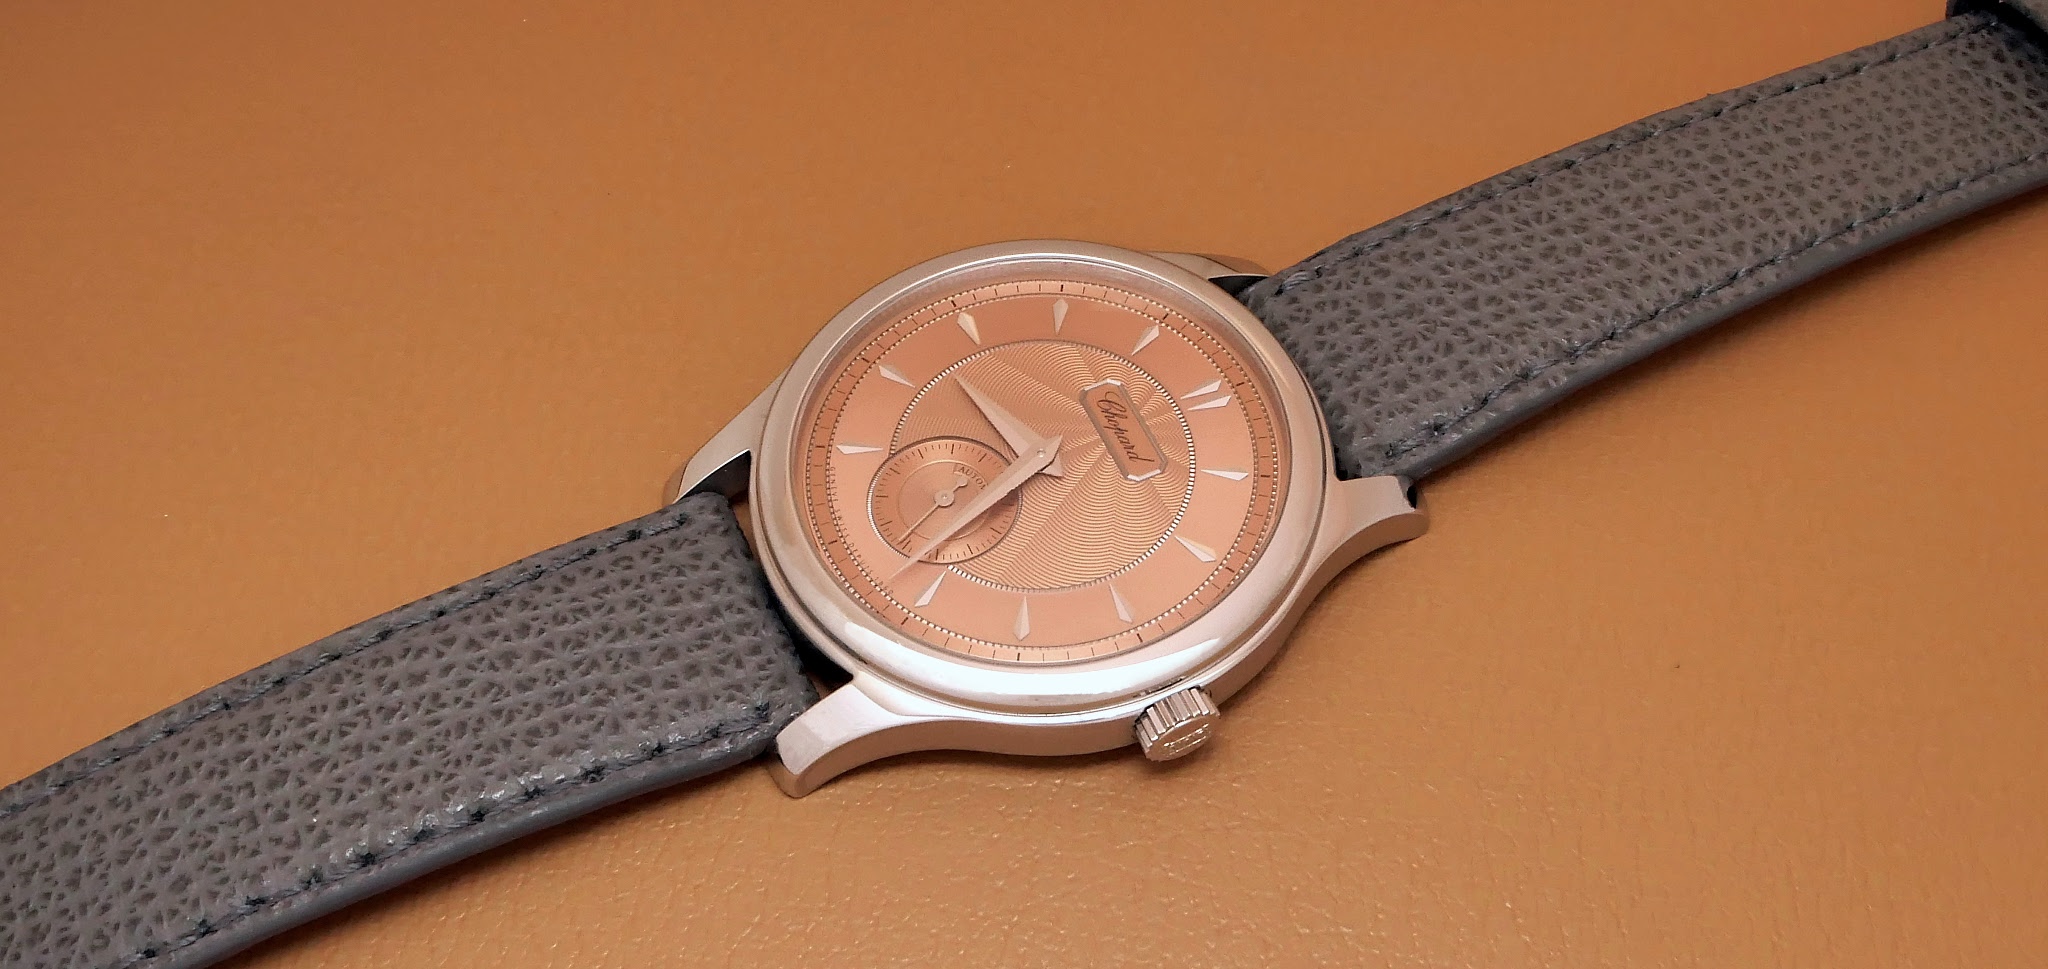 Watches and Wonders 2023: Chopard LUC 1860 Lucent Steel, Salmon Dial.